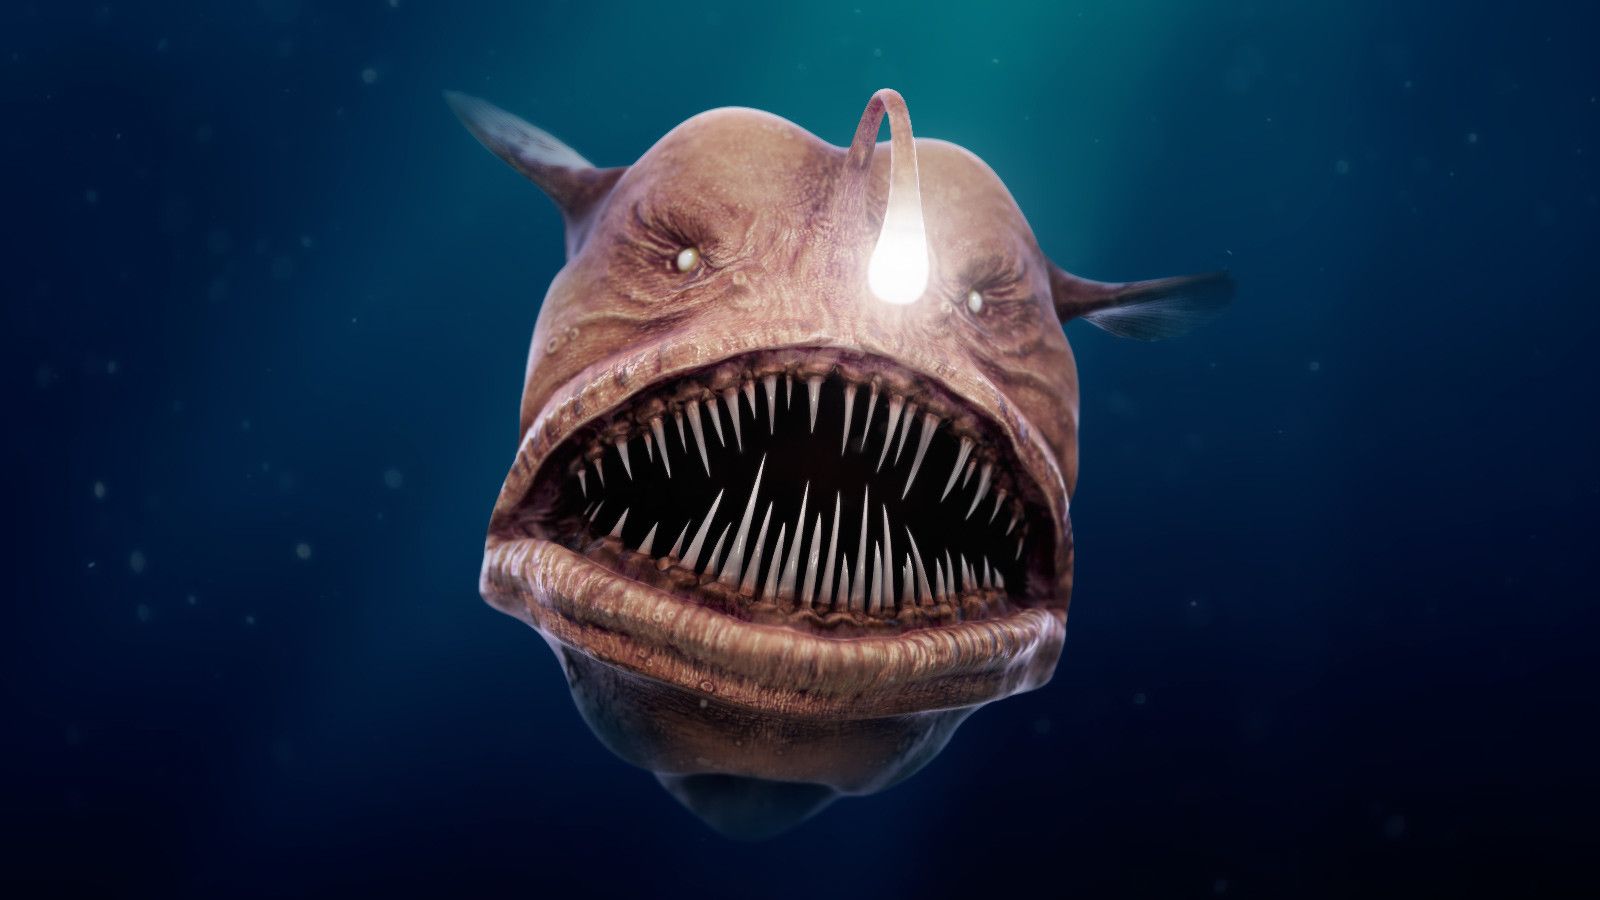 Anglerfish are named after the way they hunt